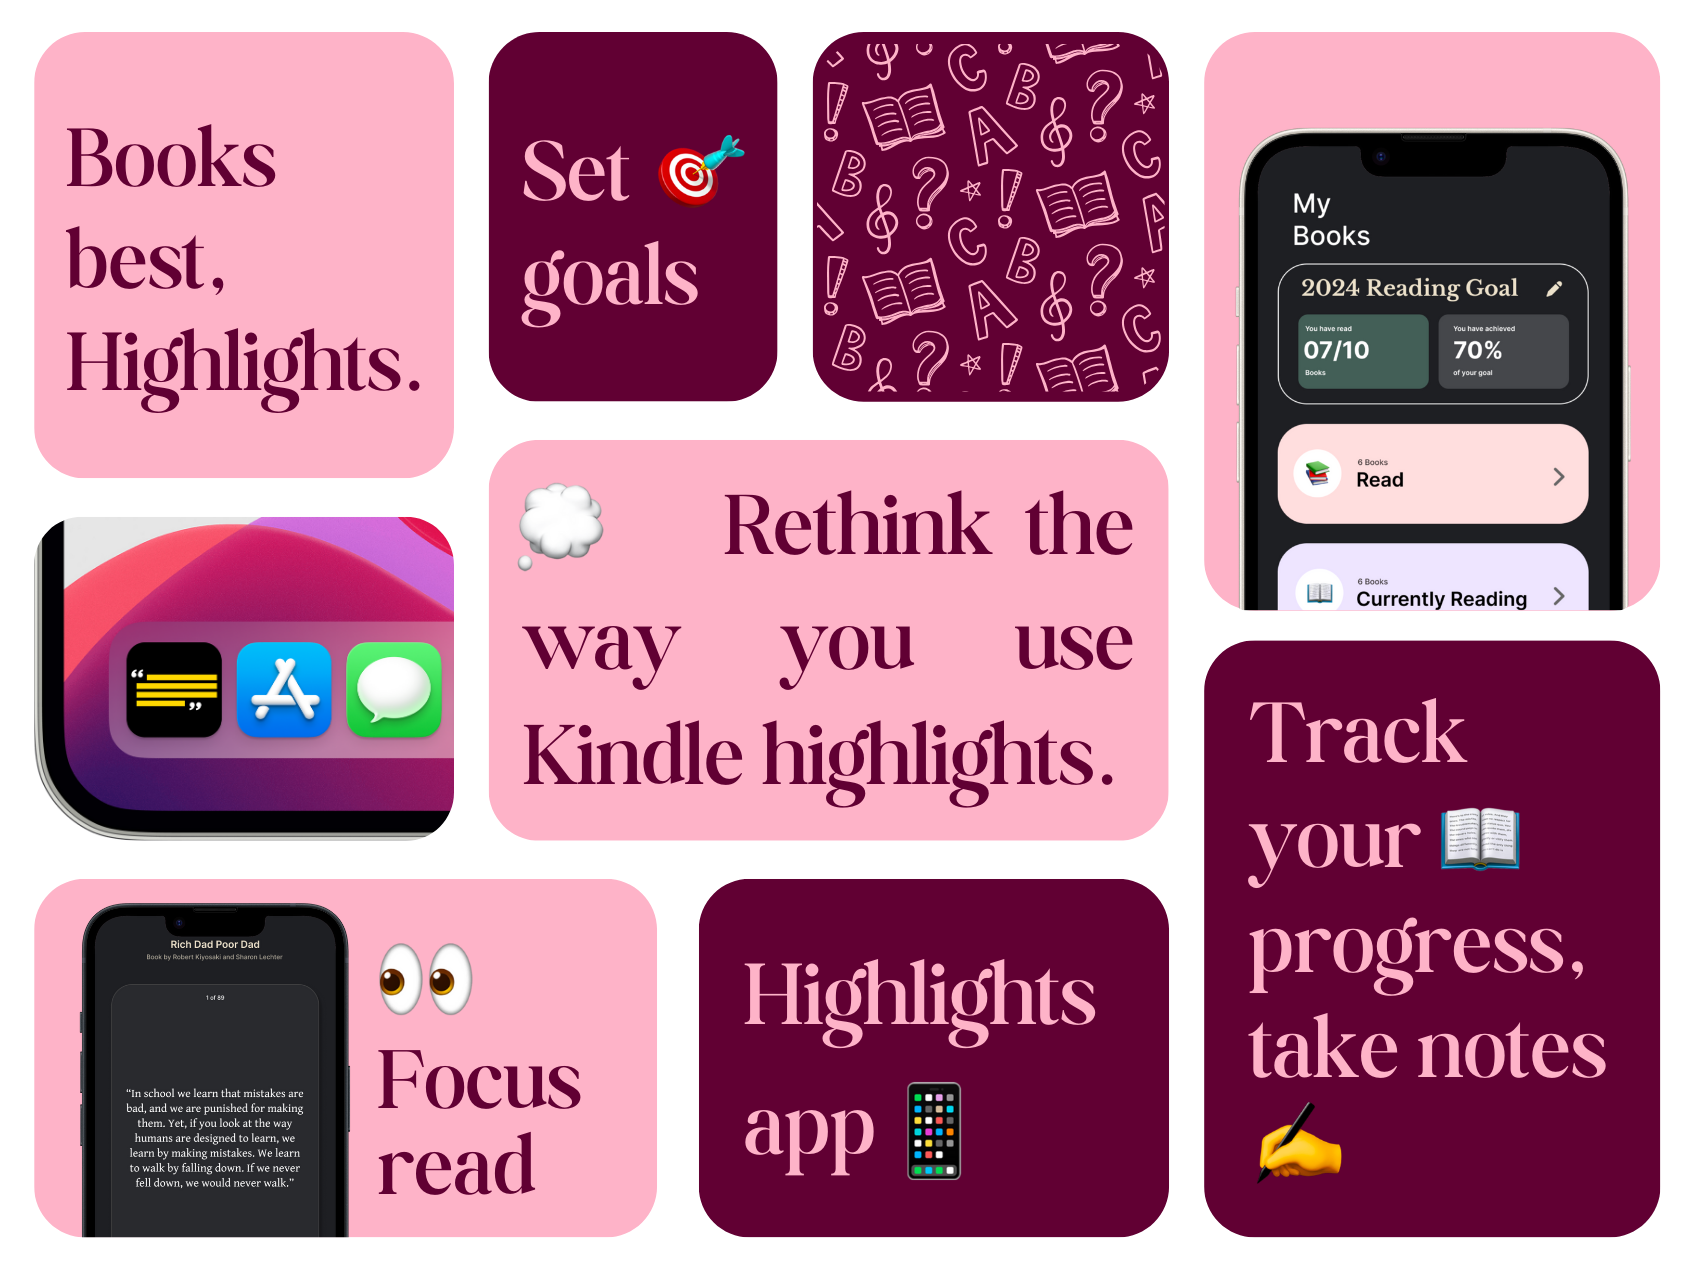 startuptile Highlights-Rethink the way you use your Kindle highlights